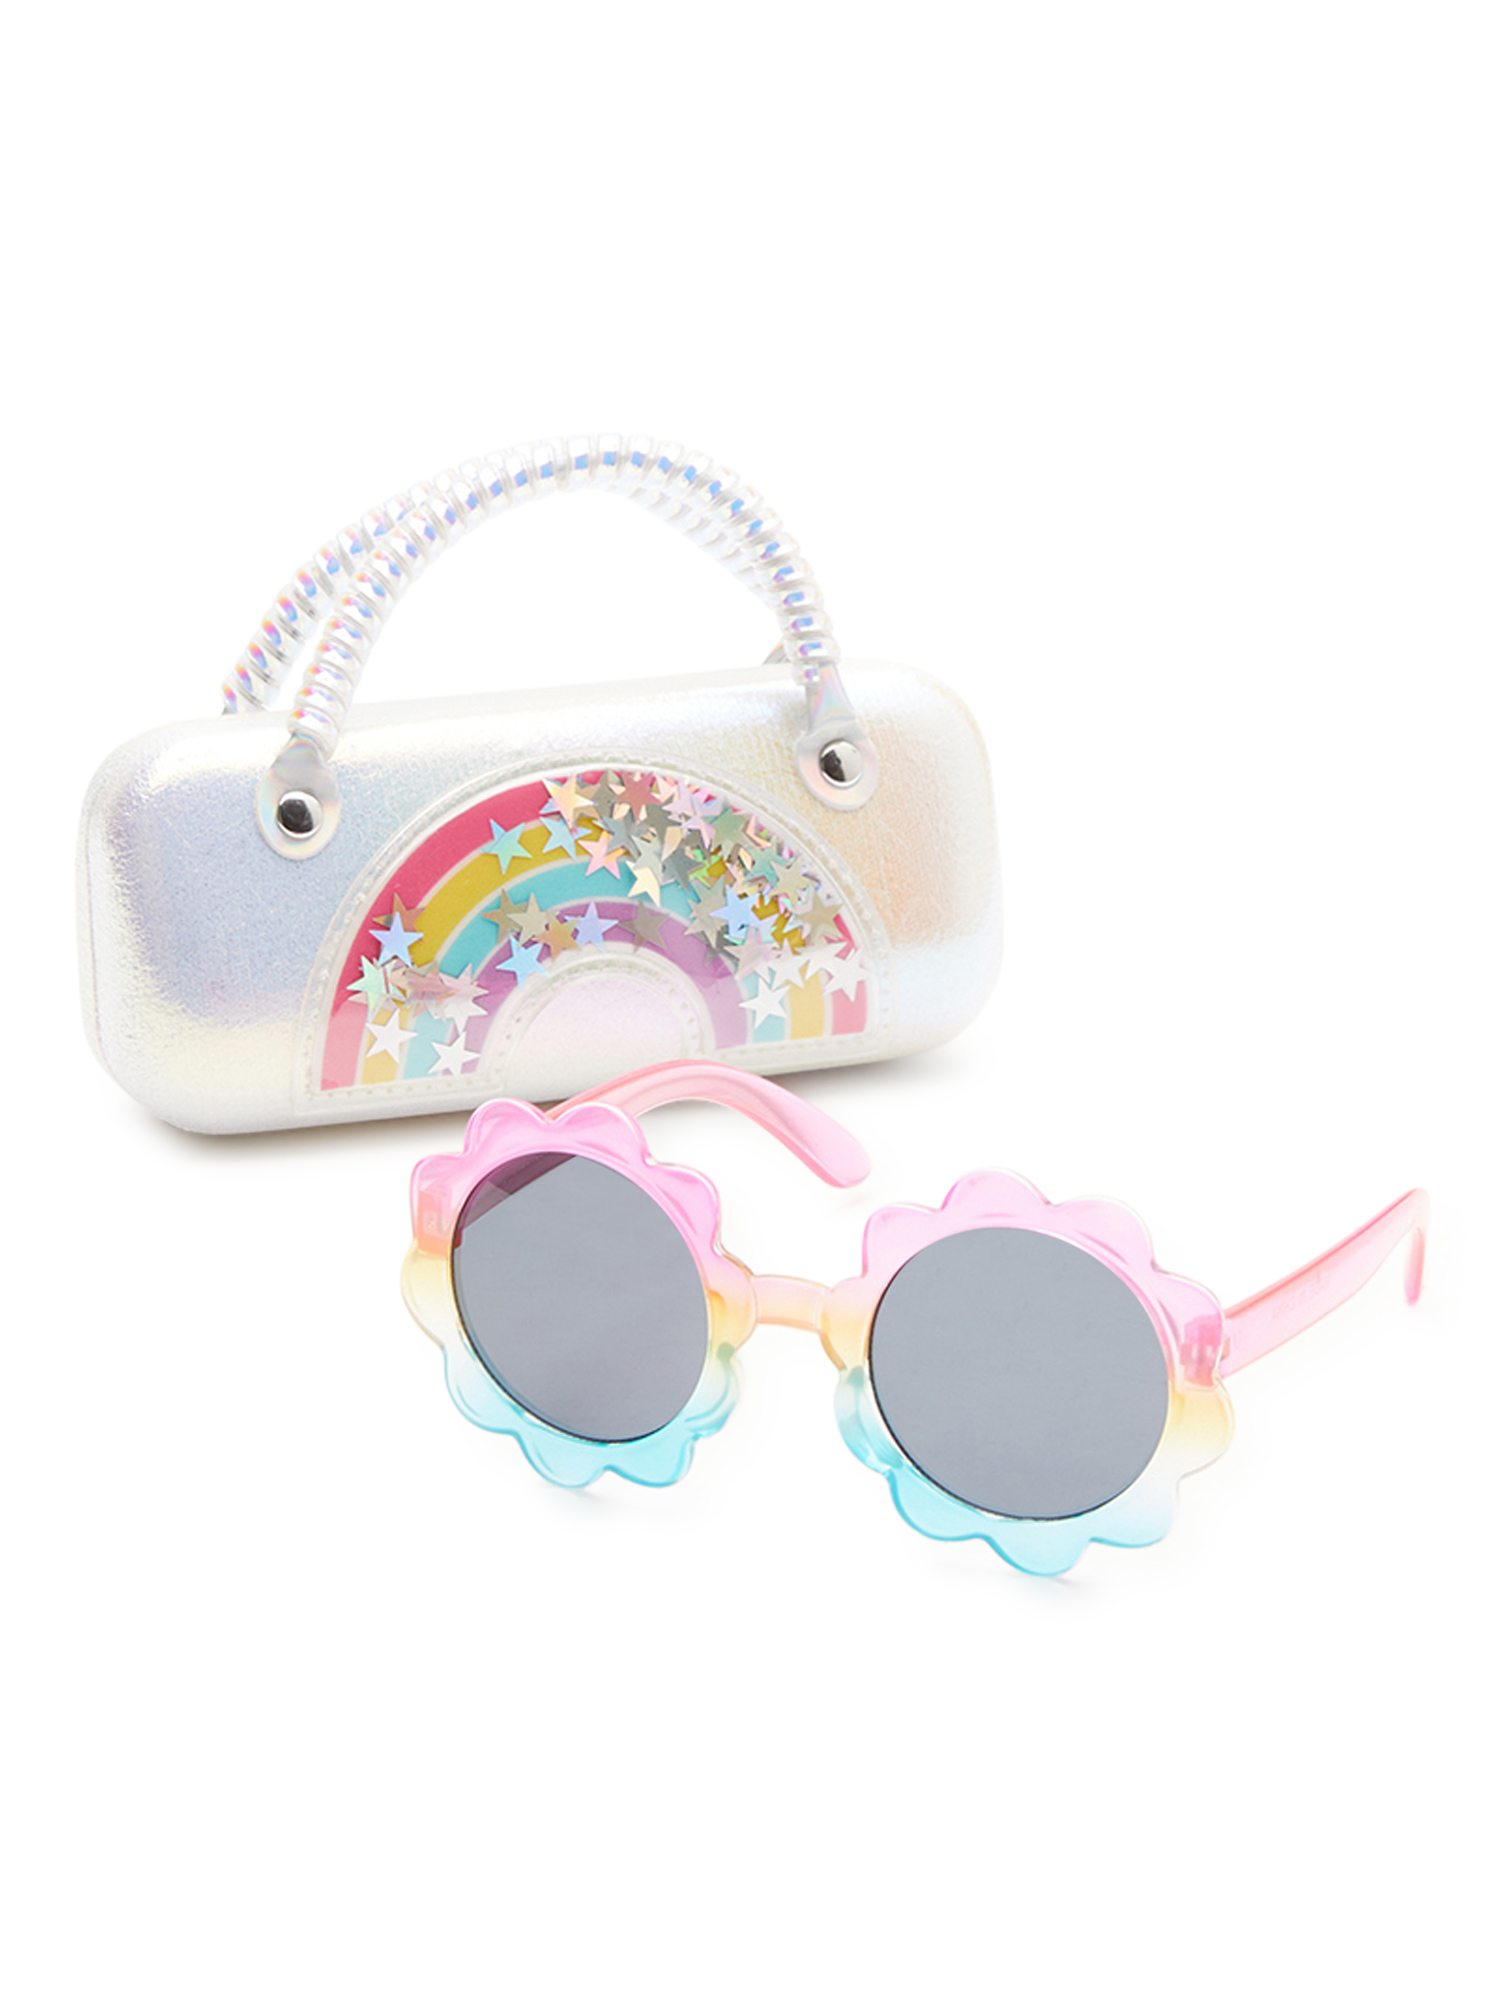 Wonder Nation Kids Rainbow Sunglasses with Carrying Case - image 1 of 2